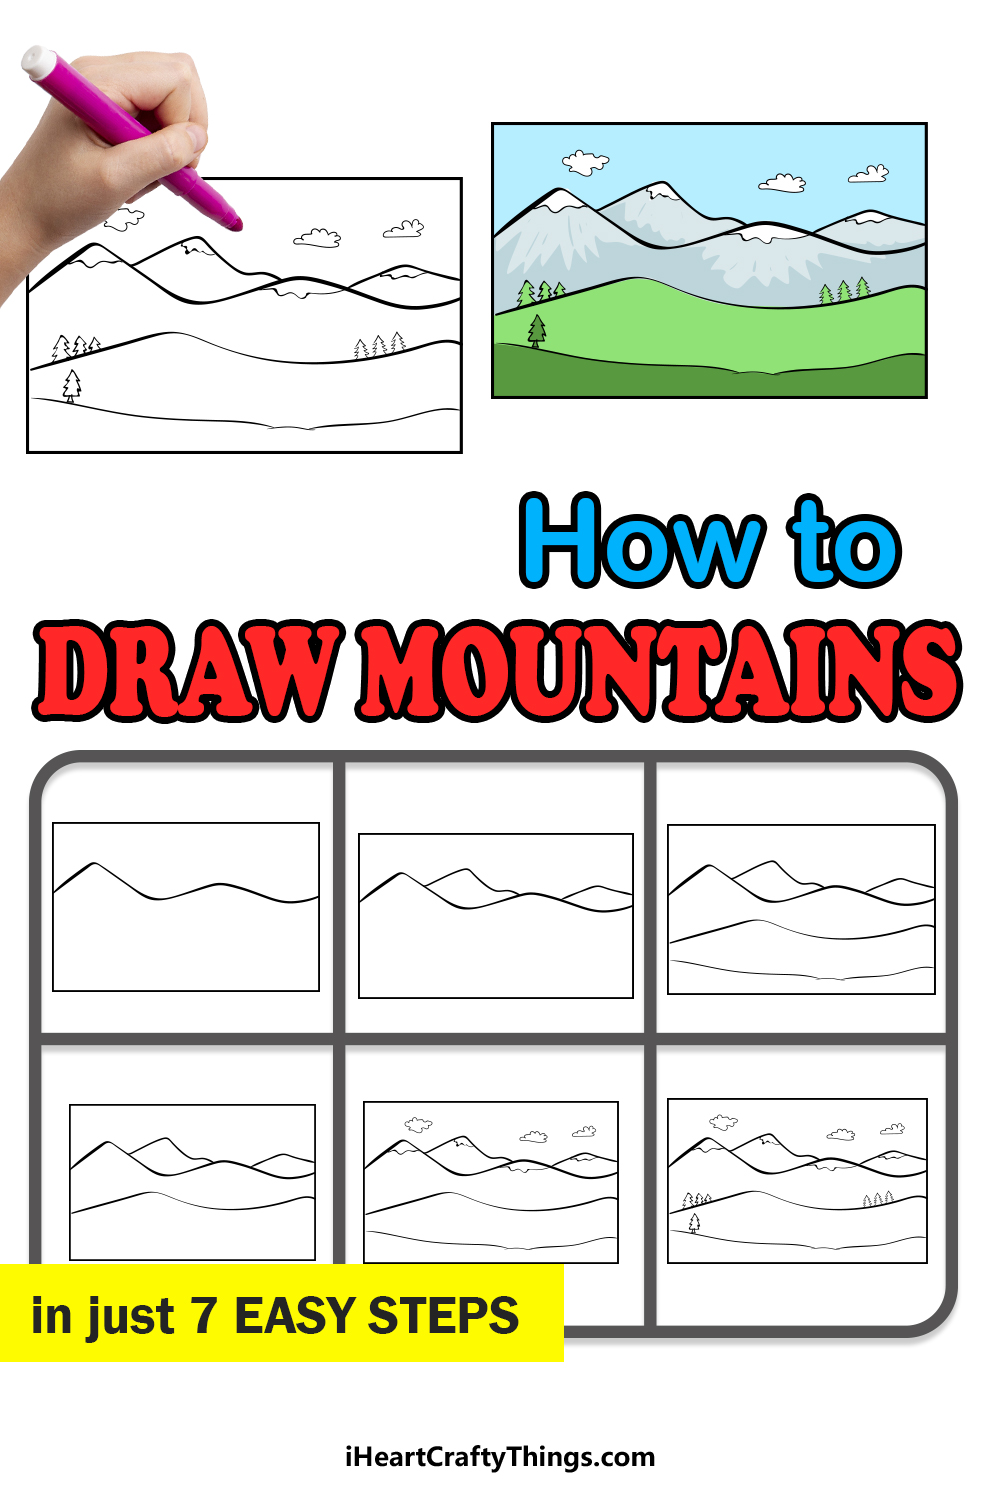 how to draw mountains in 7 easy steps